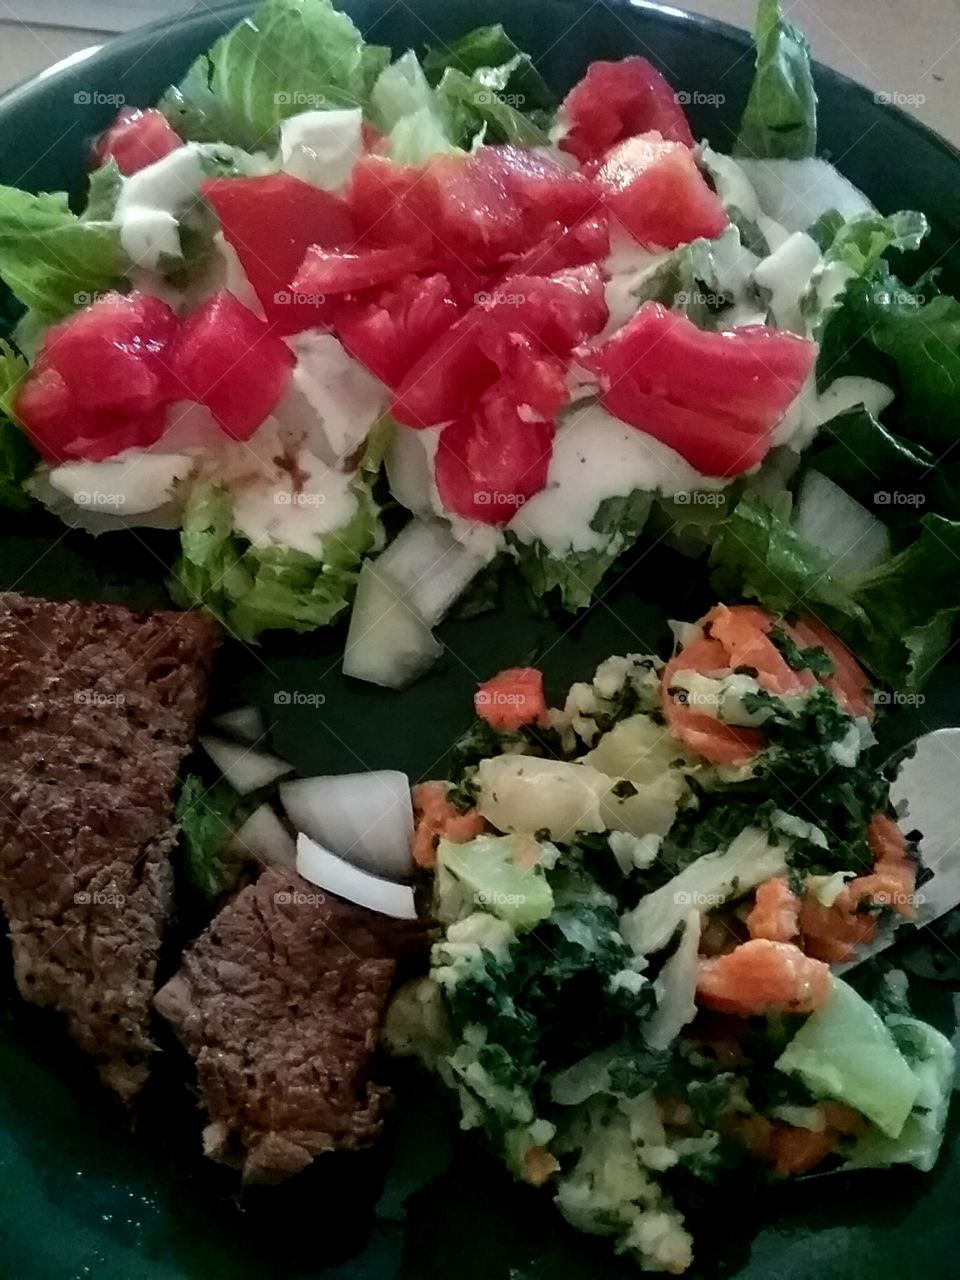 steak and salad.with organic  romaine lettuce fresh tomatoes onion and more cooked veggies on the side